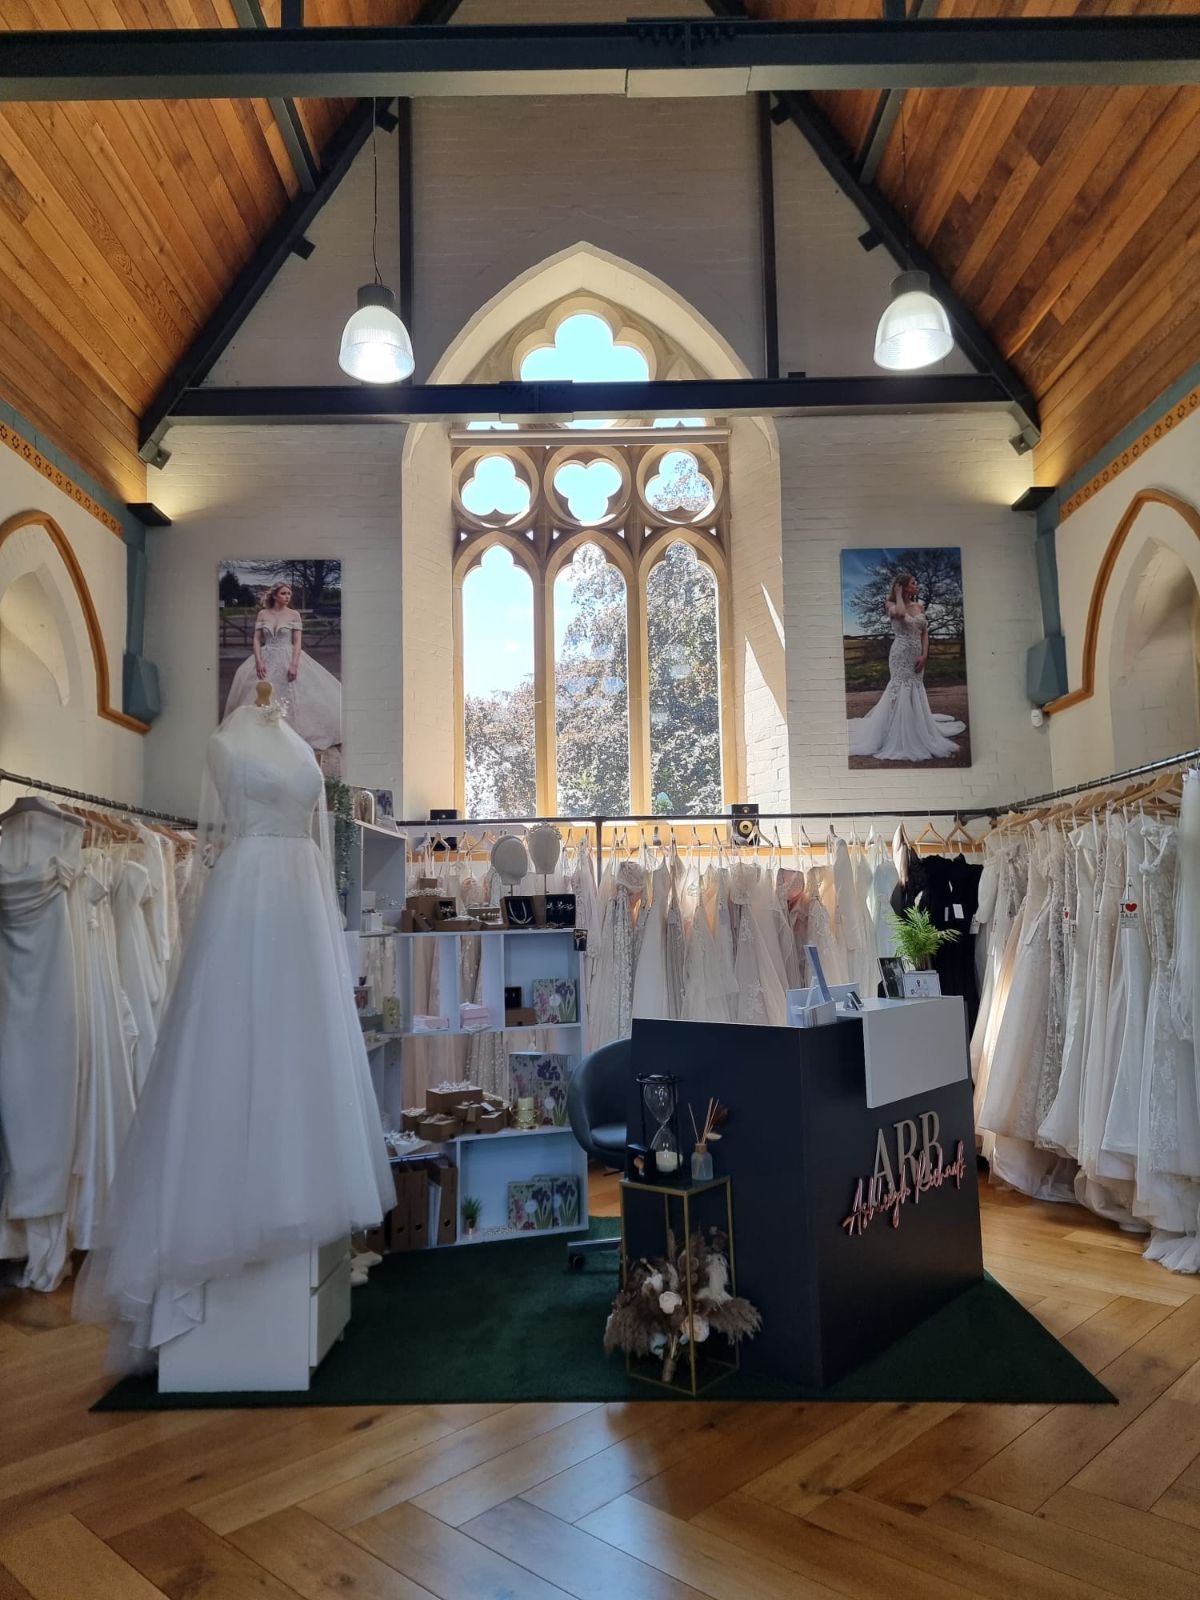 Keep up to date with Ashleigh Richards Bridal by joining their Facebook page